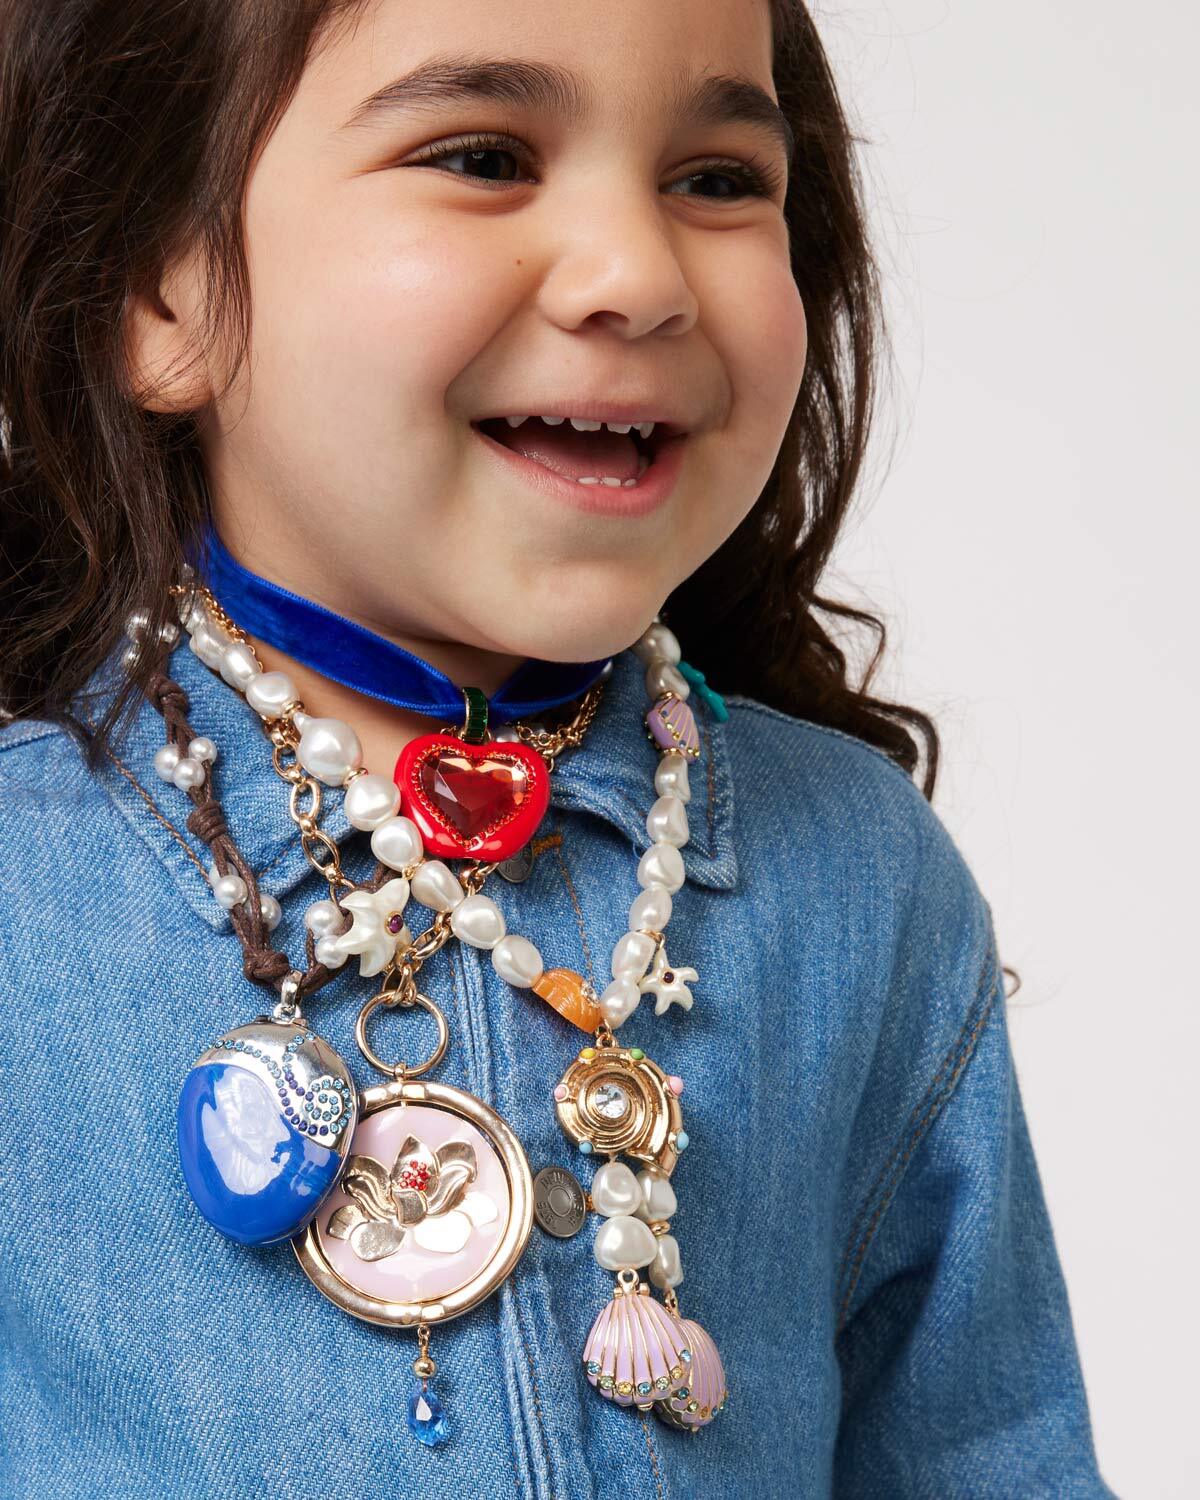 Cute Princess Stainless Medical Alert Necklace for Girls